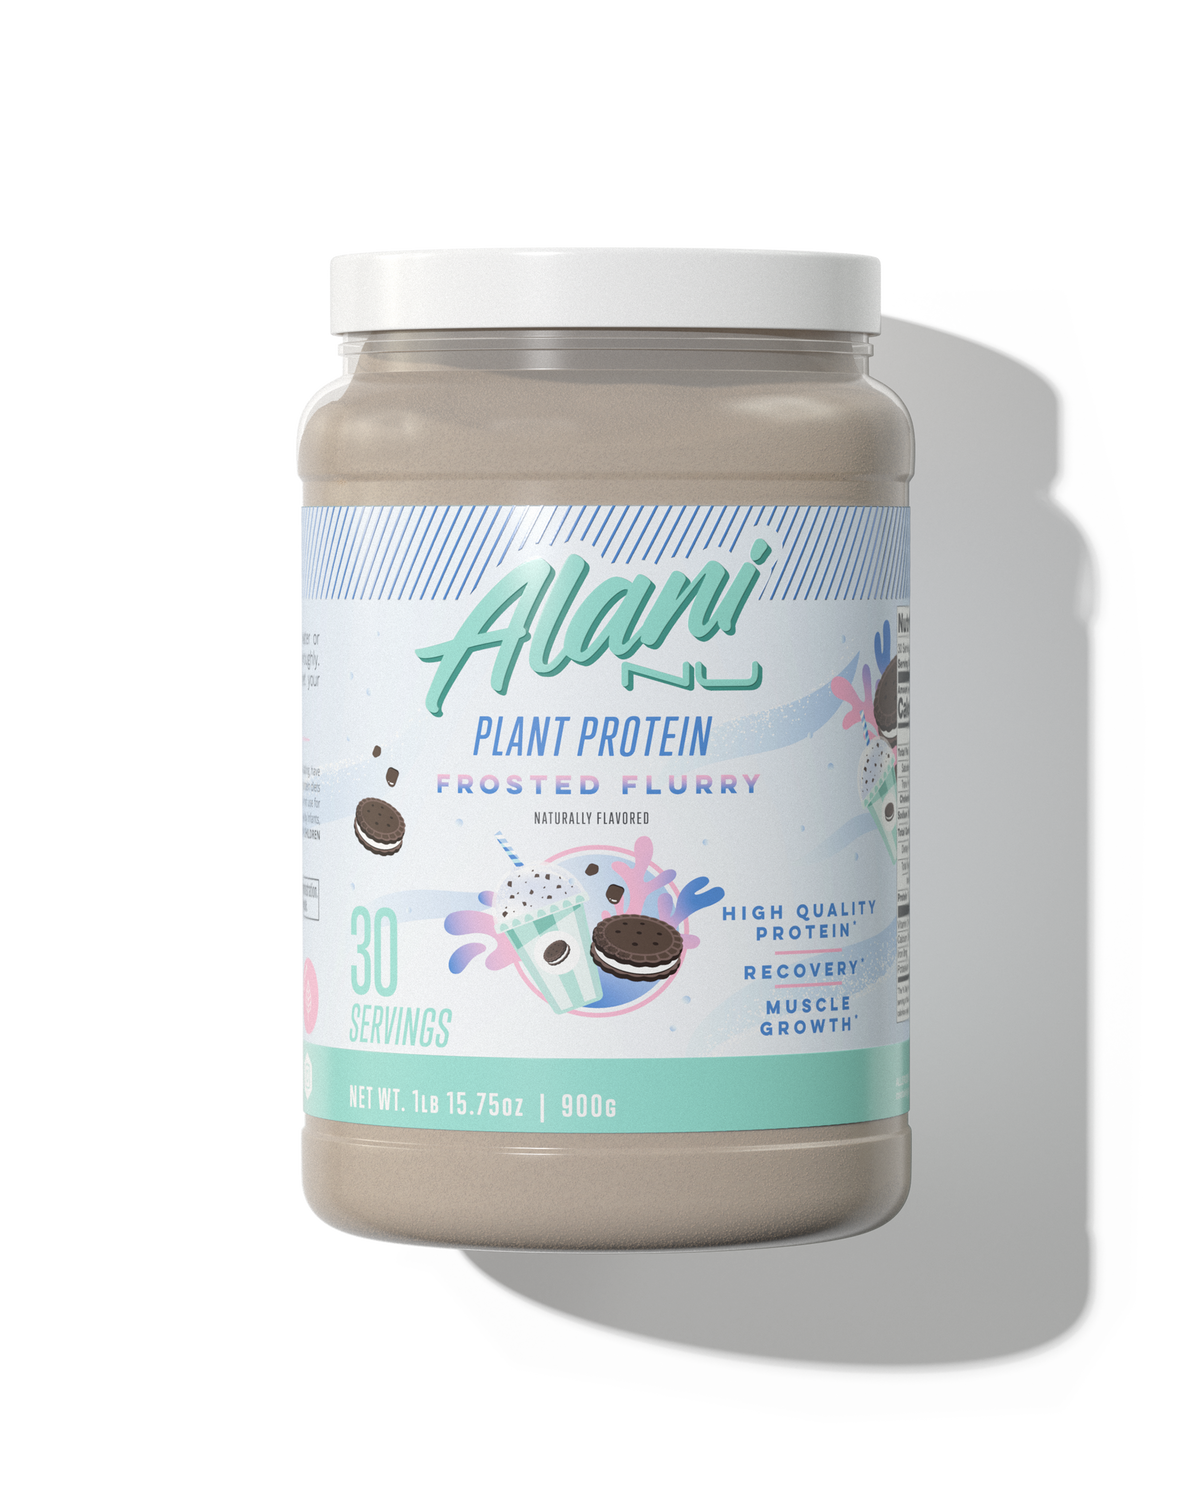 A 30 serving container of Plant Protein in Frosted Flurry flavor.